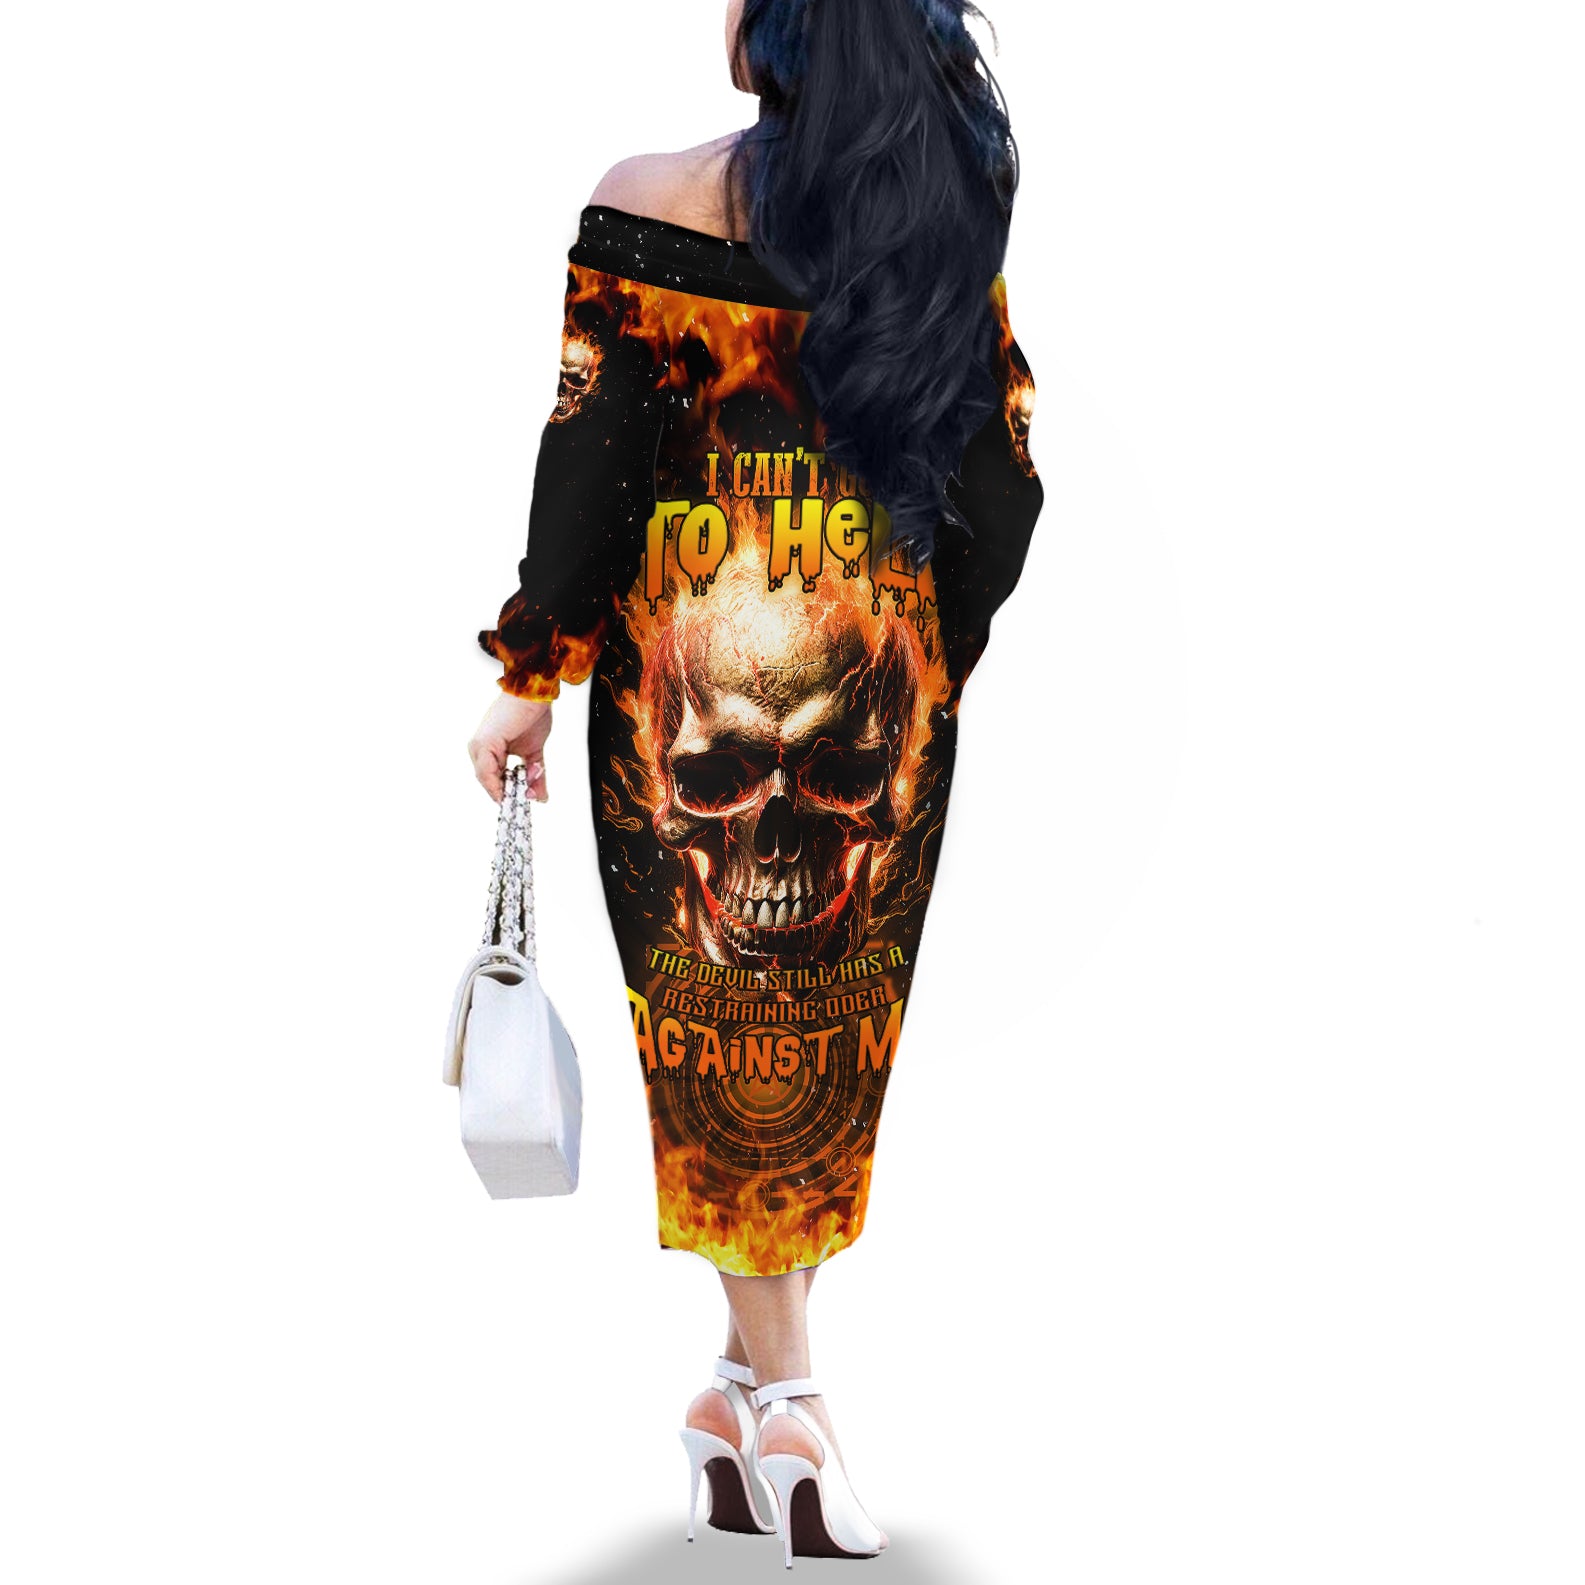 magic-fire-skull-off-the-shoulder-long-sleeve-dress-i-cant-go-to-hell-the-devil-still-has-a-rest-training-oder-against-me